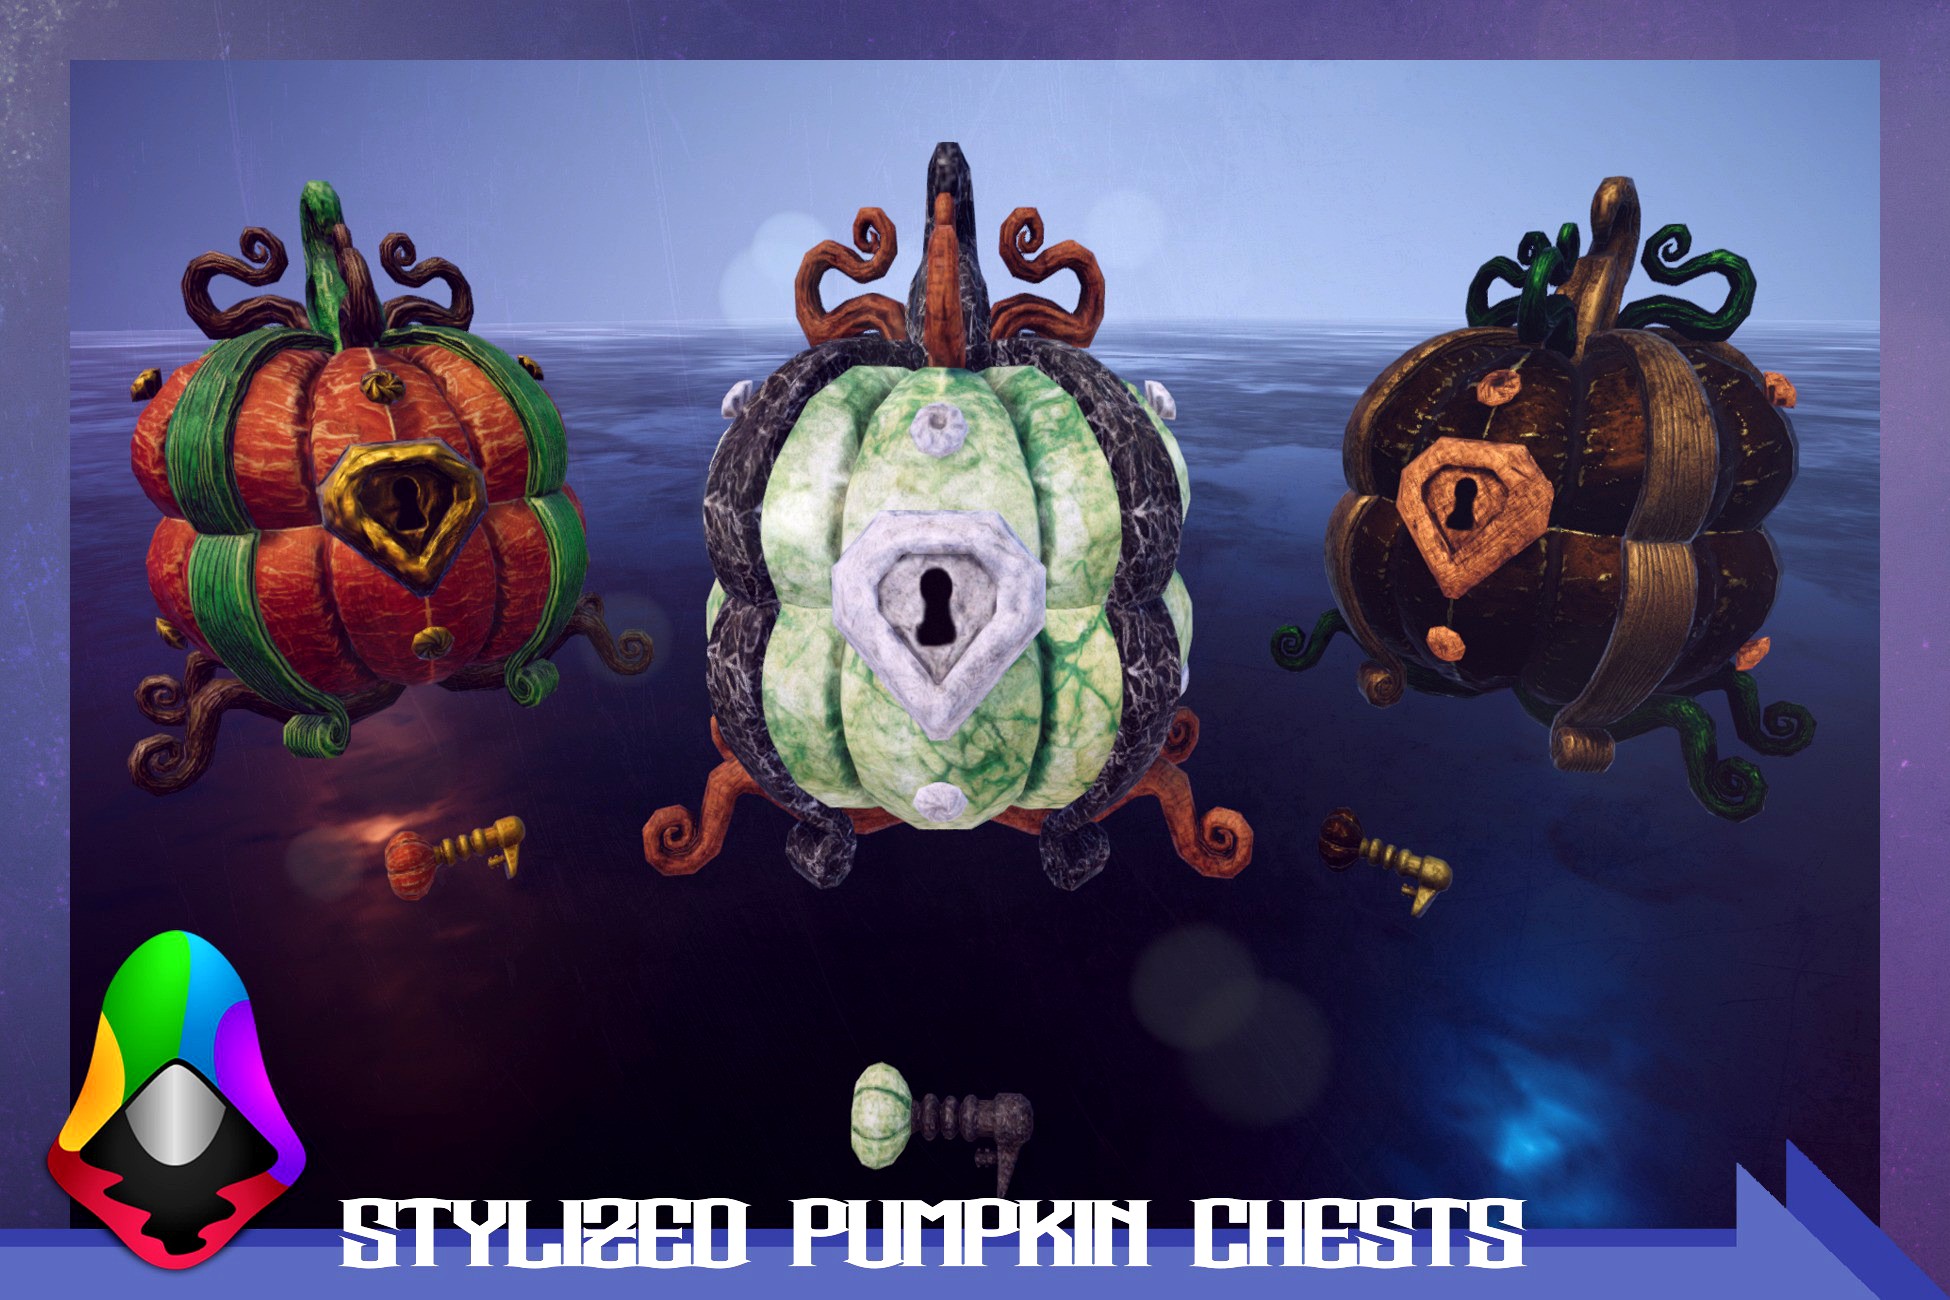 Stylized Chests: Pumpkin Chest